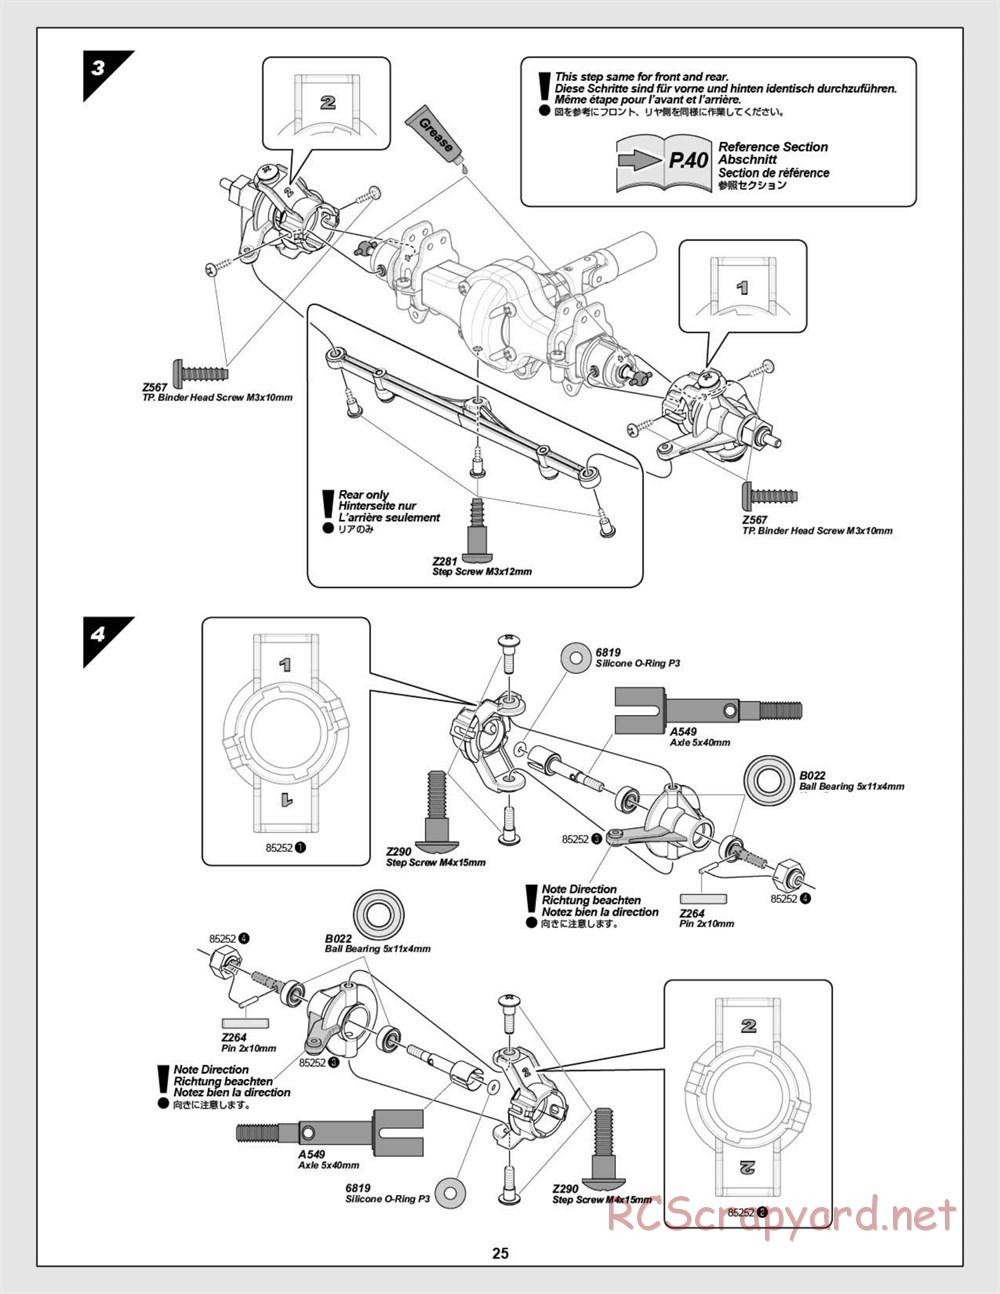 HPI - Wheely King 4x4 - Manual - Page 25